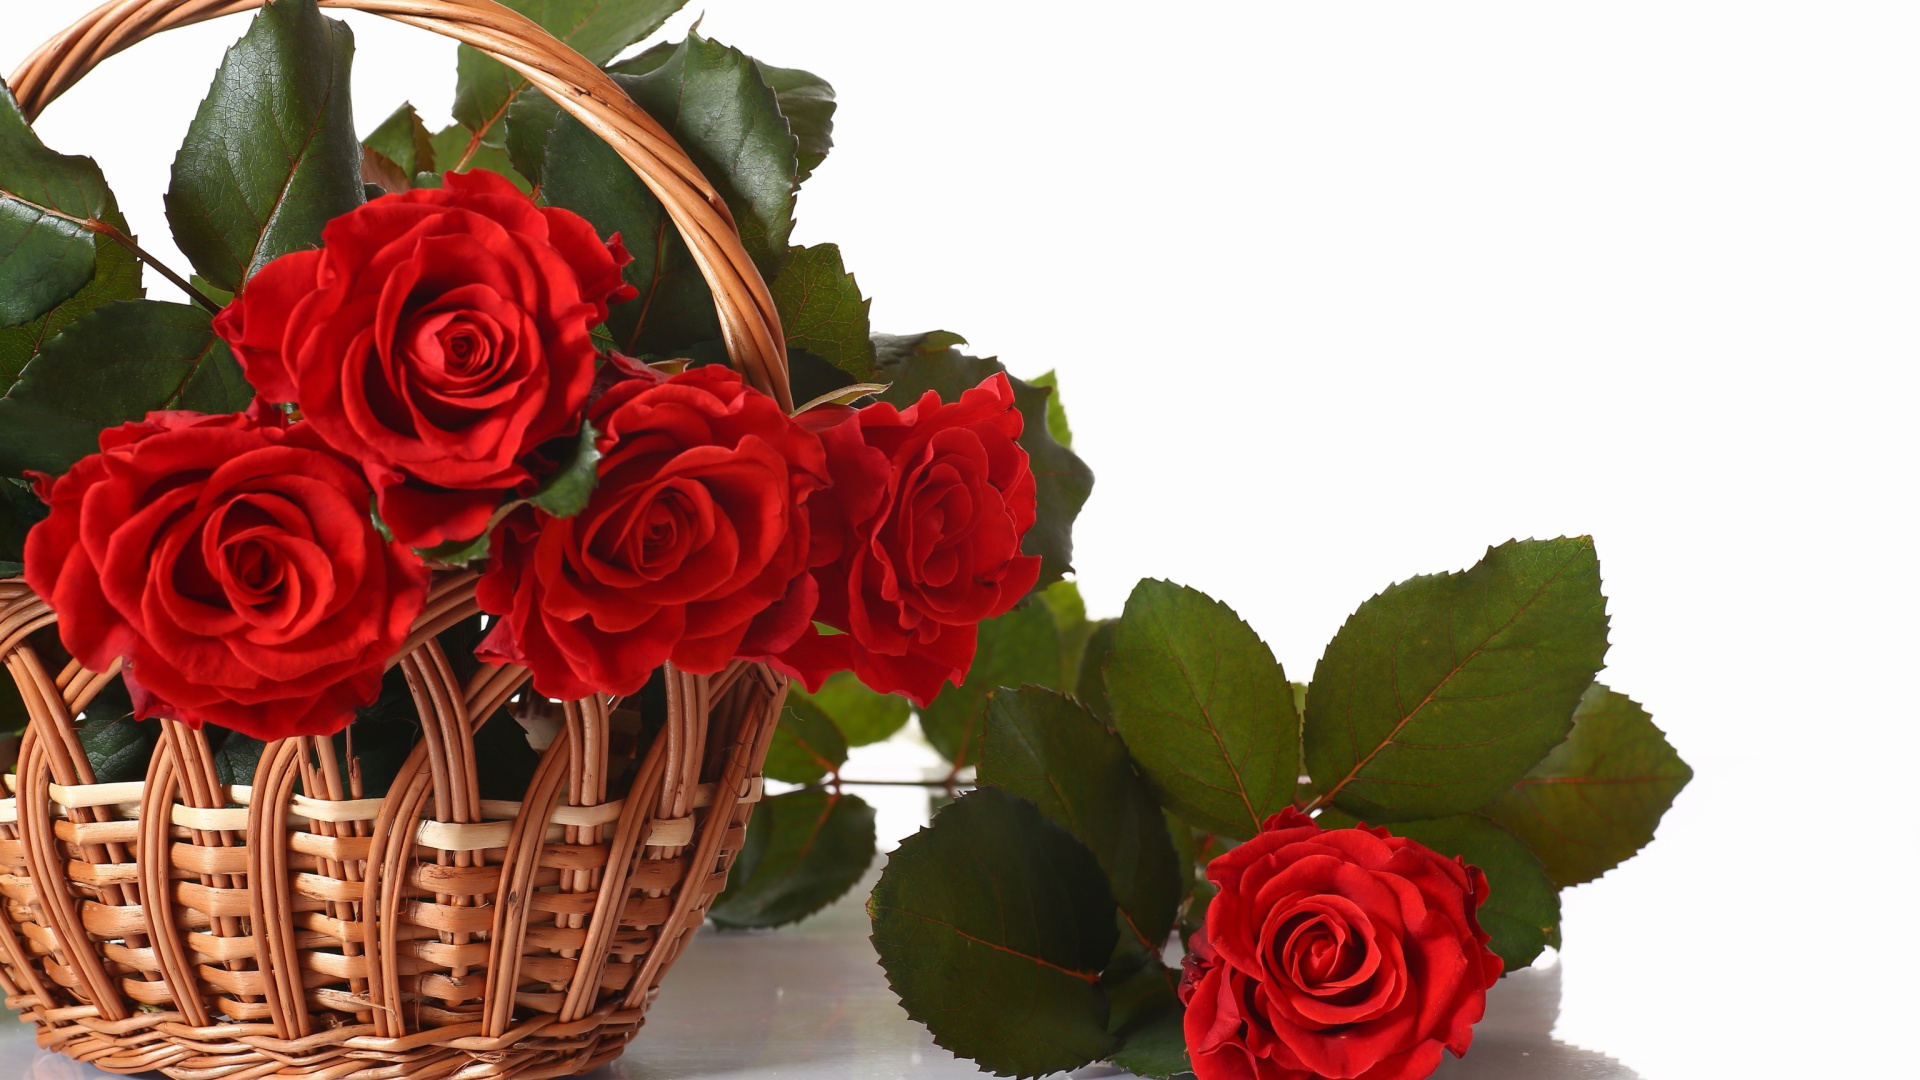 Basket with Roses wallpaper 1920x1080